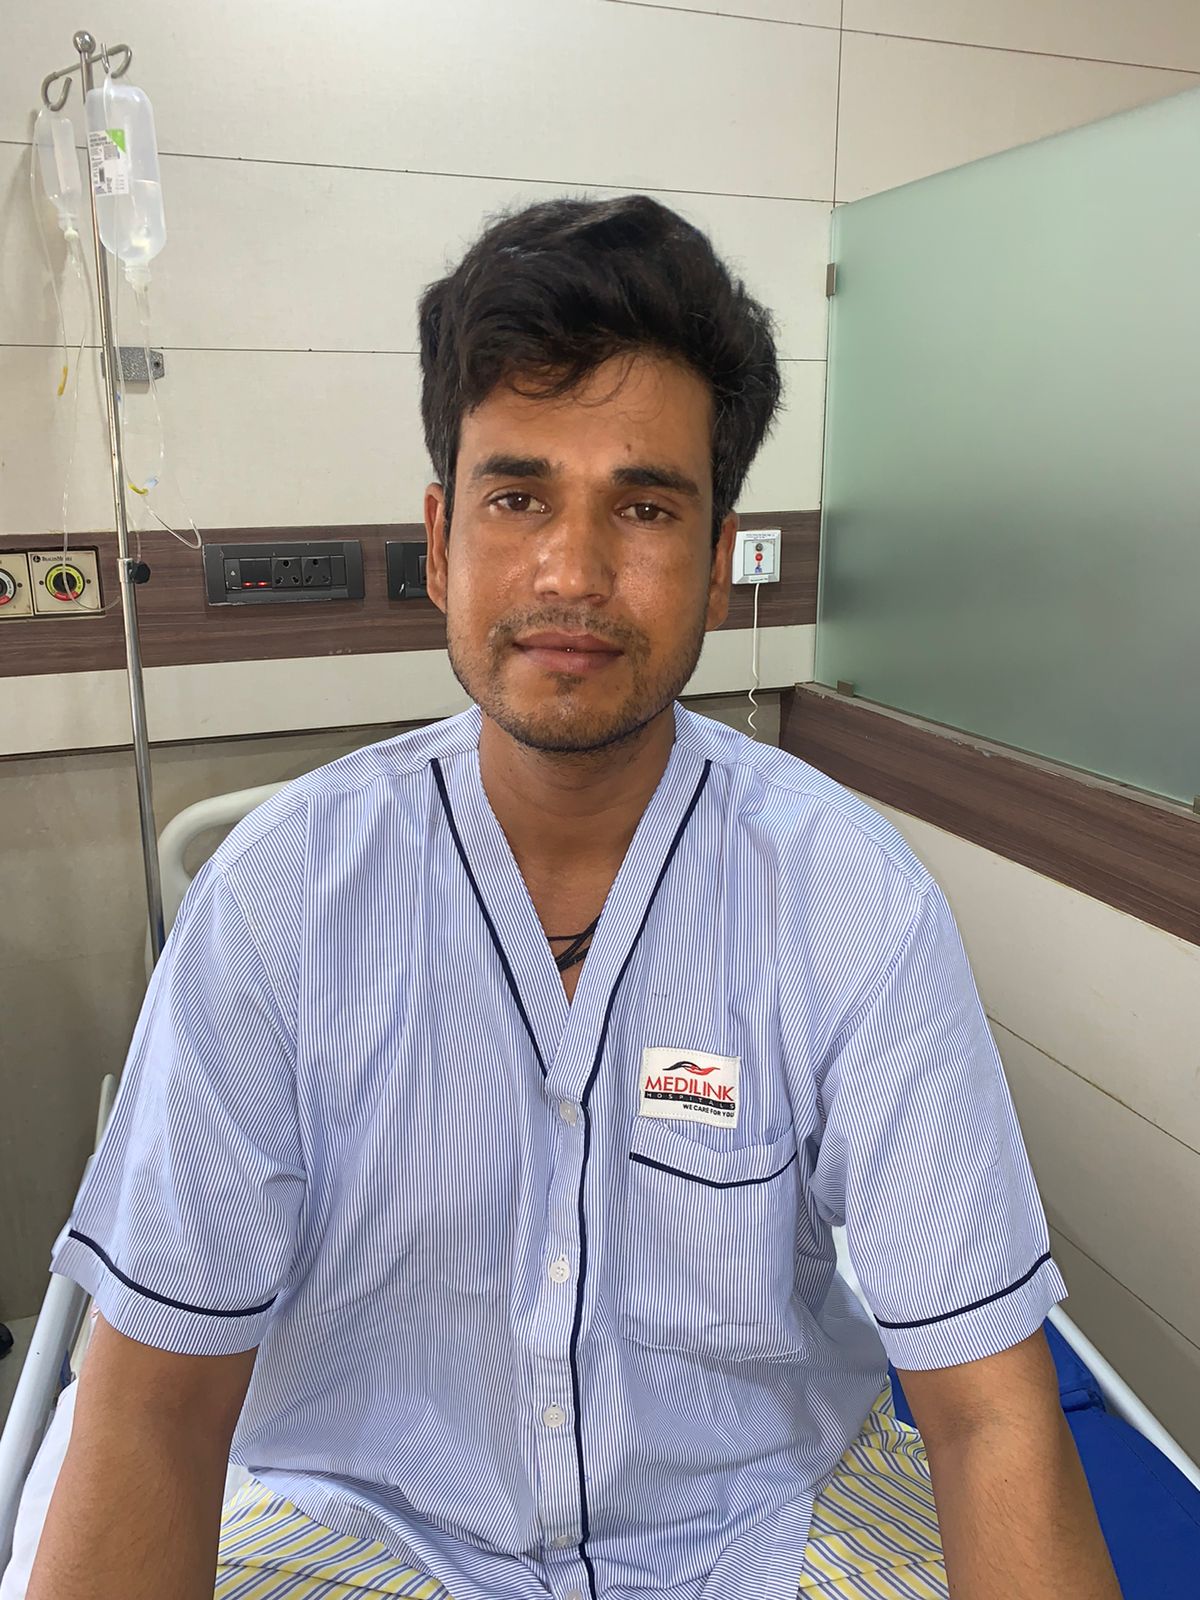 Learn about Neuroendocrine Tumor (NE Tumor)- How a patient with repeated fainting episodes was diagnosed and received the best treatment for NE Tumor at Ahmedabad by Dr. Avinash Tank